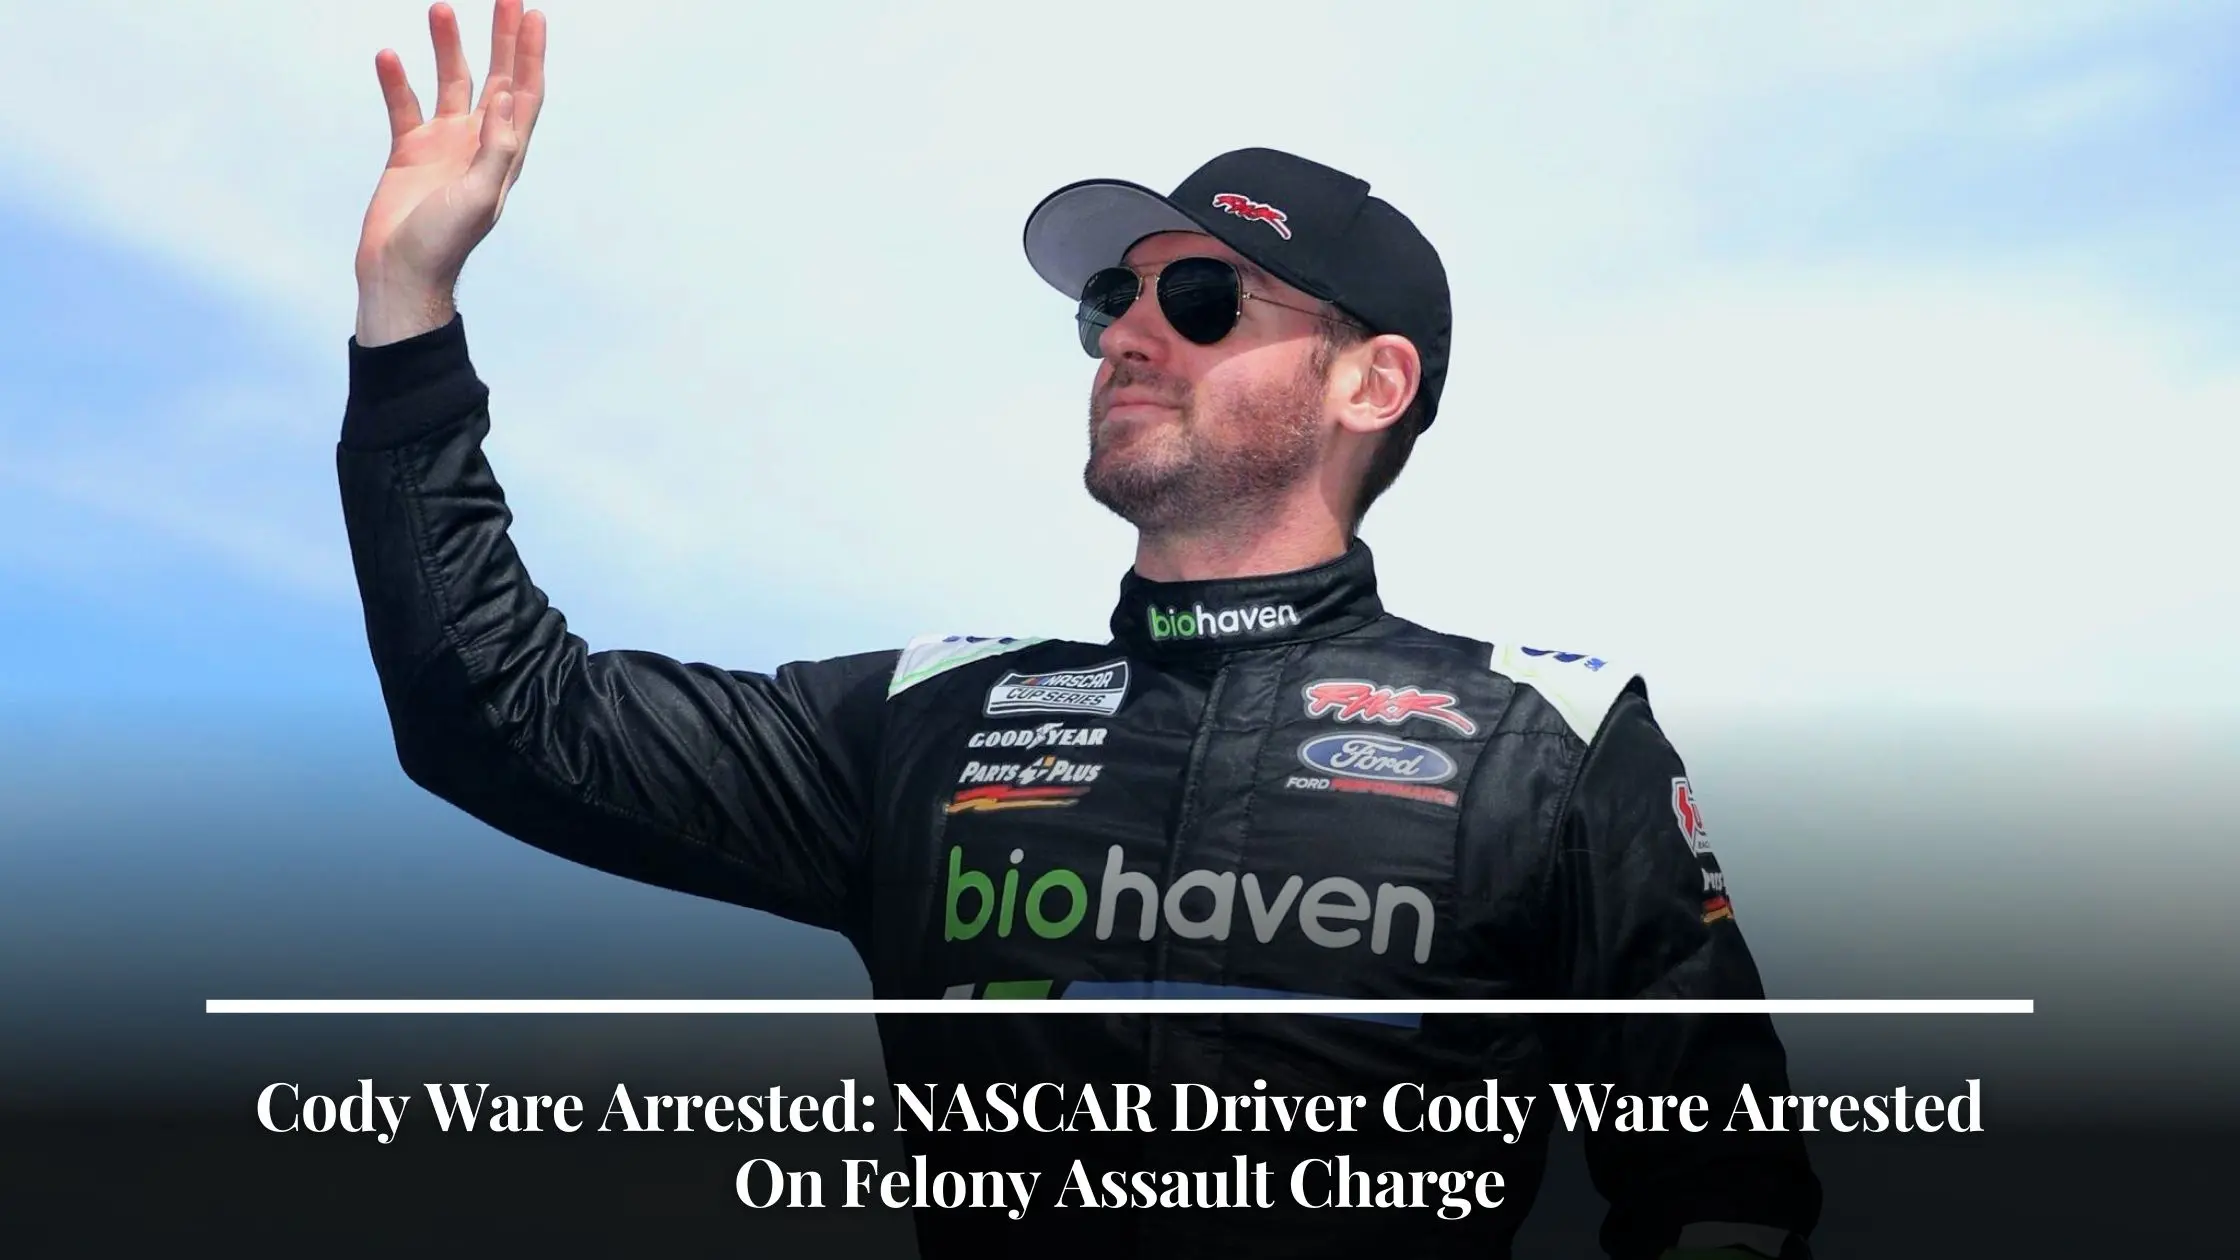 Cody Ware Arrested NASCAR Driver Cody Ware Arrested On Felony Assault Charge